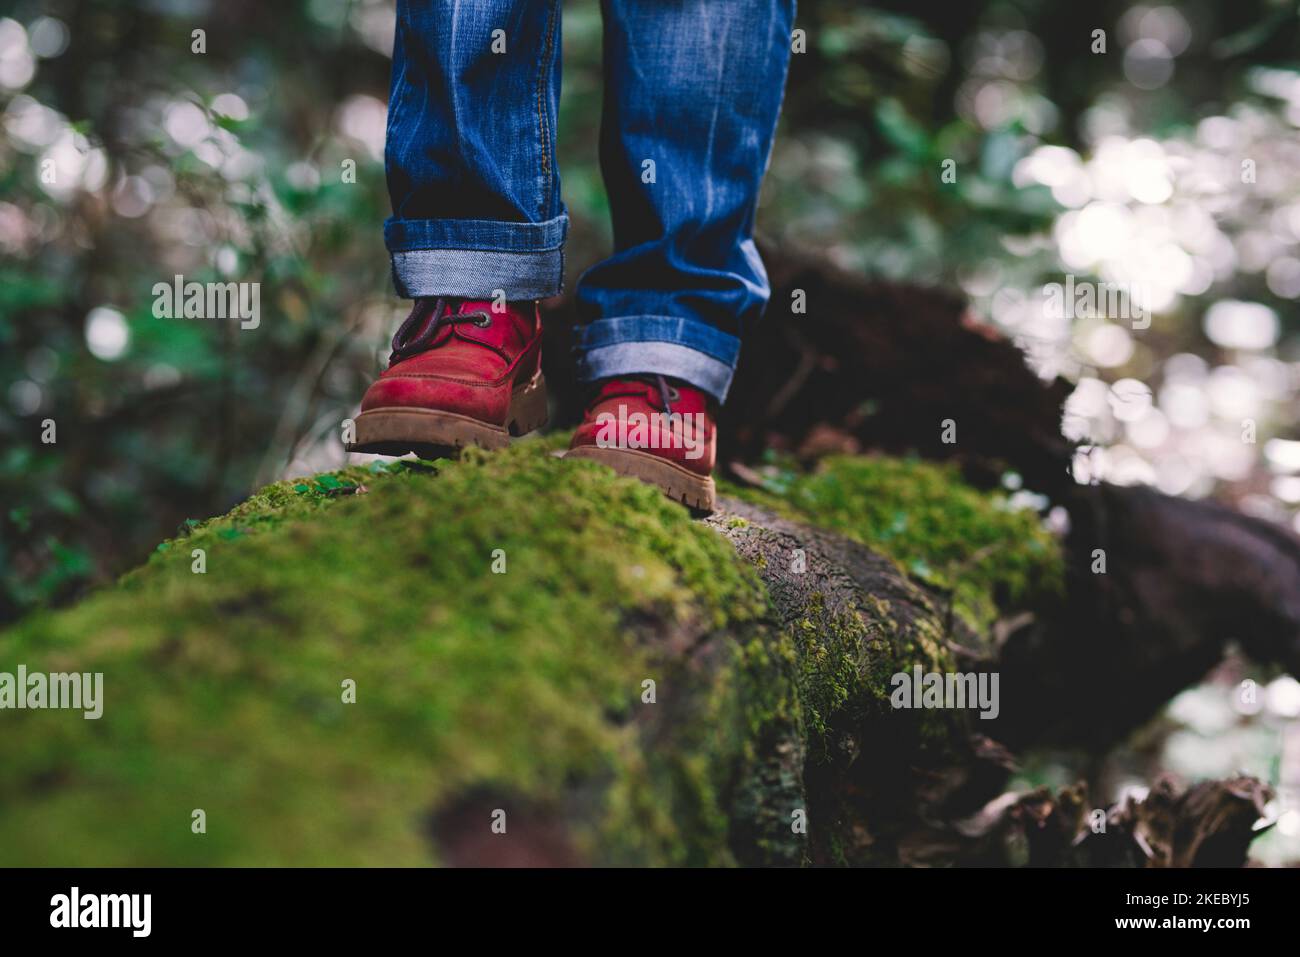 Close up of people feet with red boots walking in the nature on a green musk covered trunk. Concept of people and nature feeling. Care of environment. Tourist leisure activity concept. Trekking trip Stock Photo